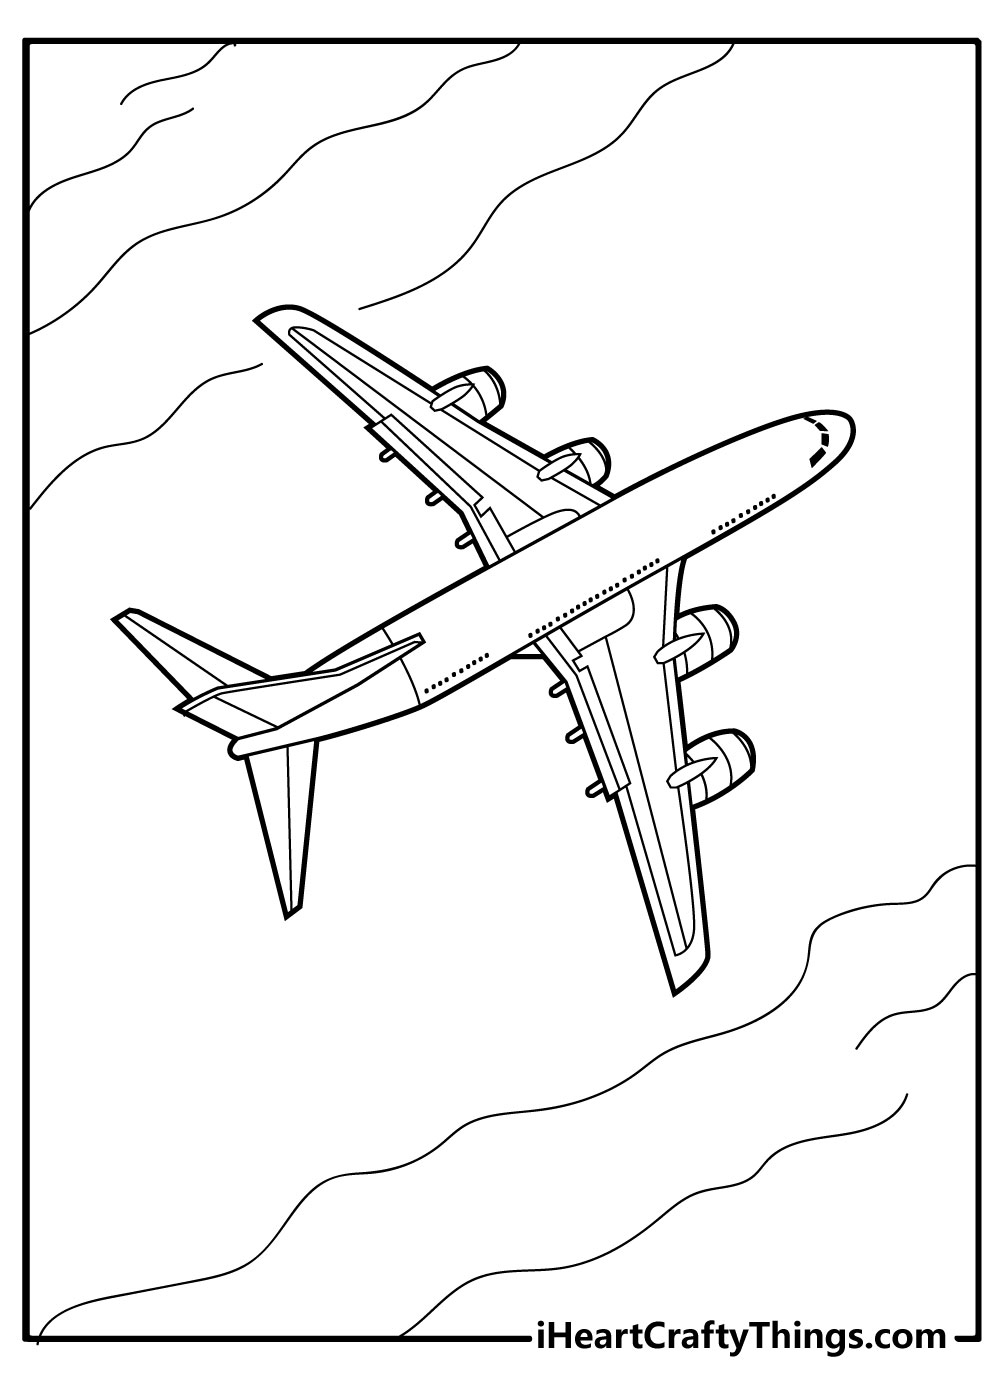 Airplane Coloring Pages for adults free printable